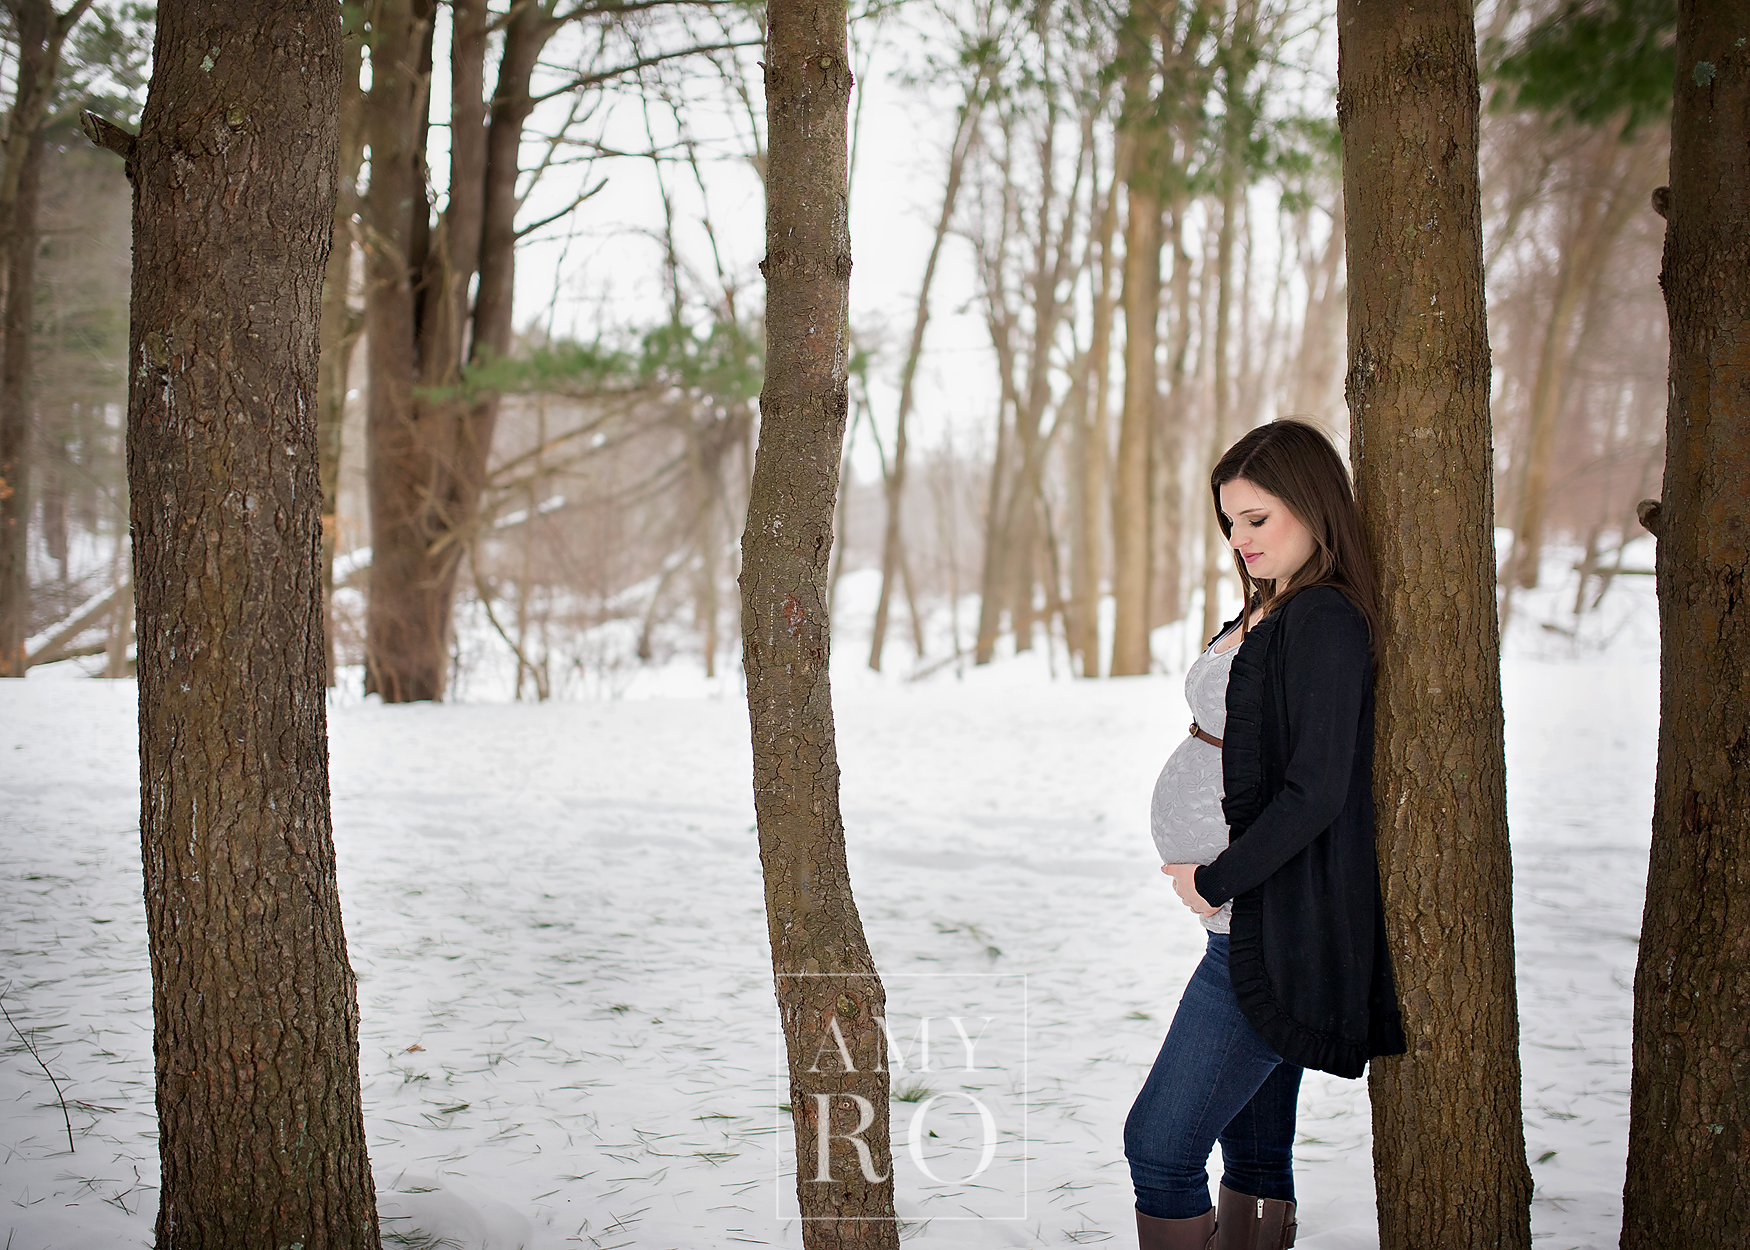 Maternity session in the snow leaning against a tree